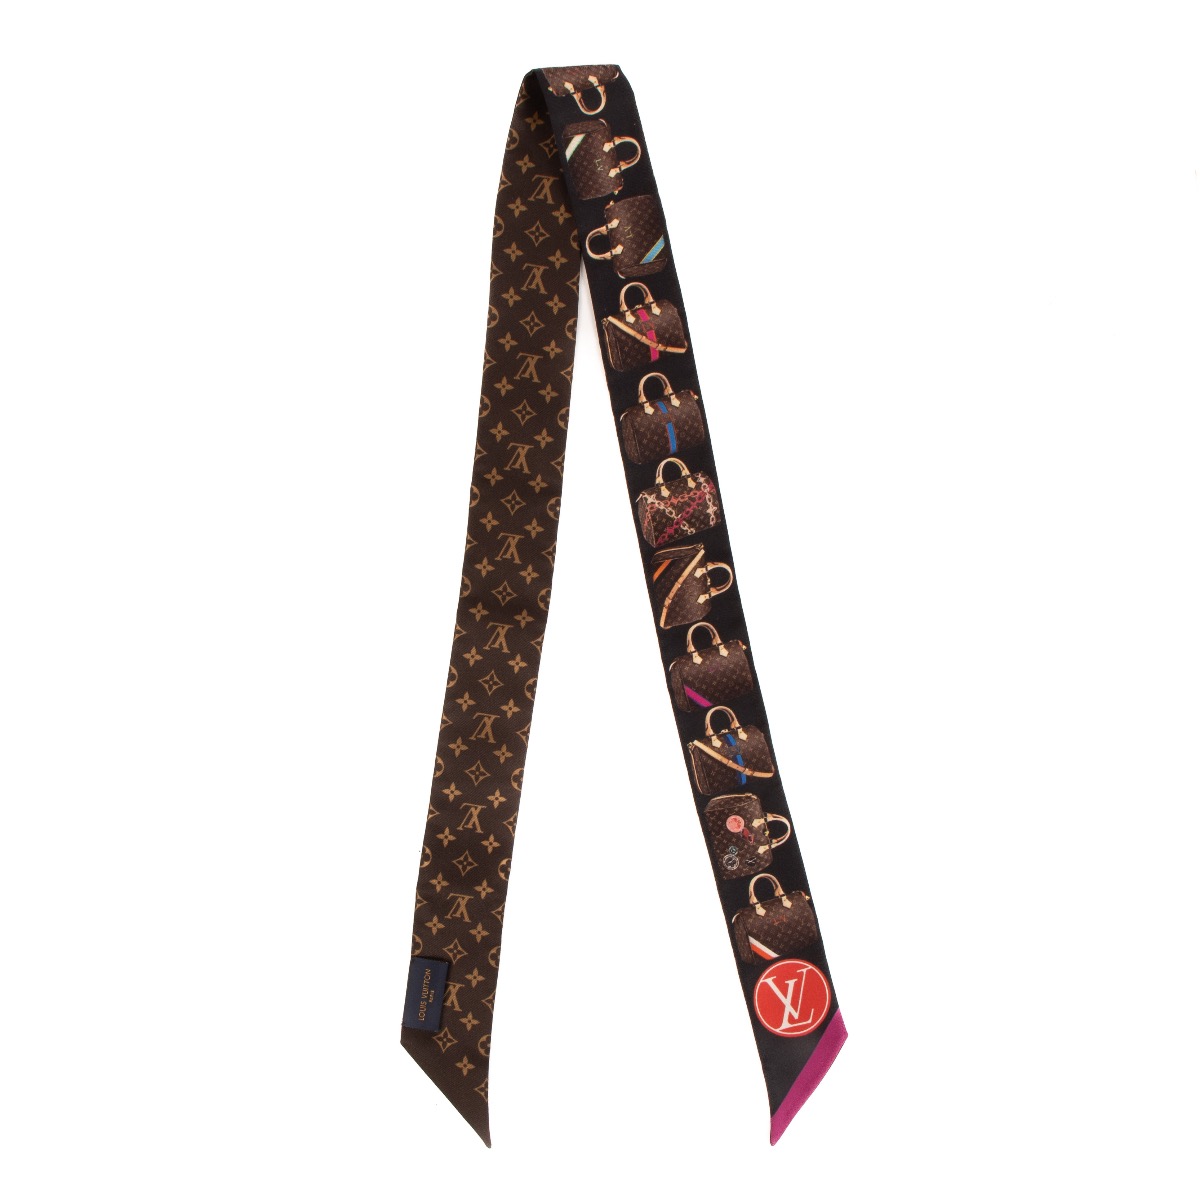 louis vuitton twilly scarves for bags